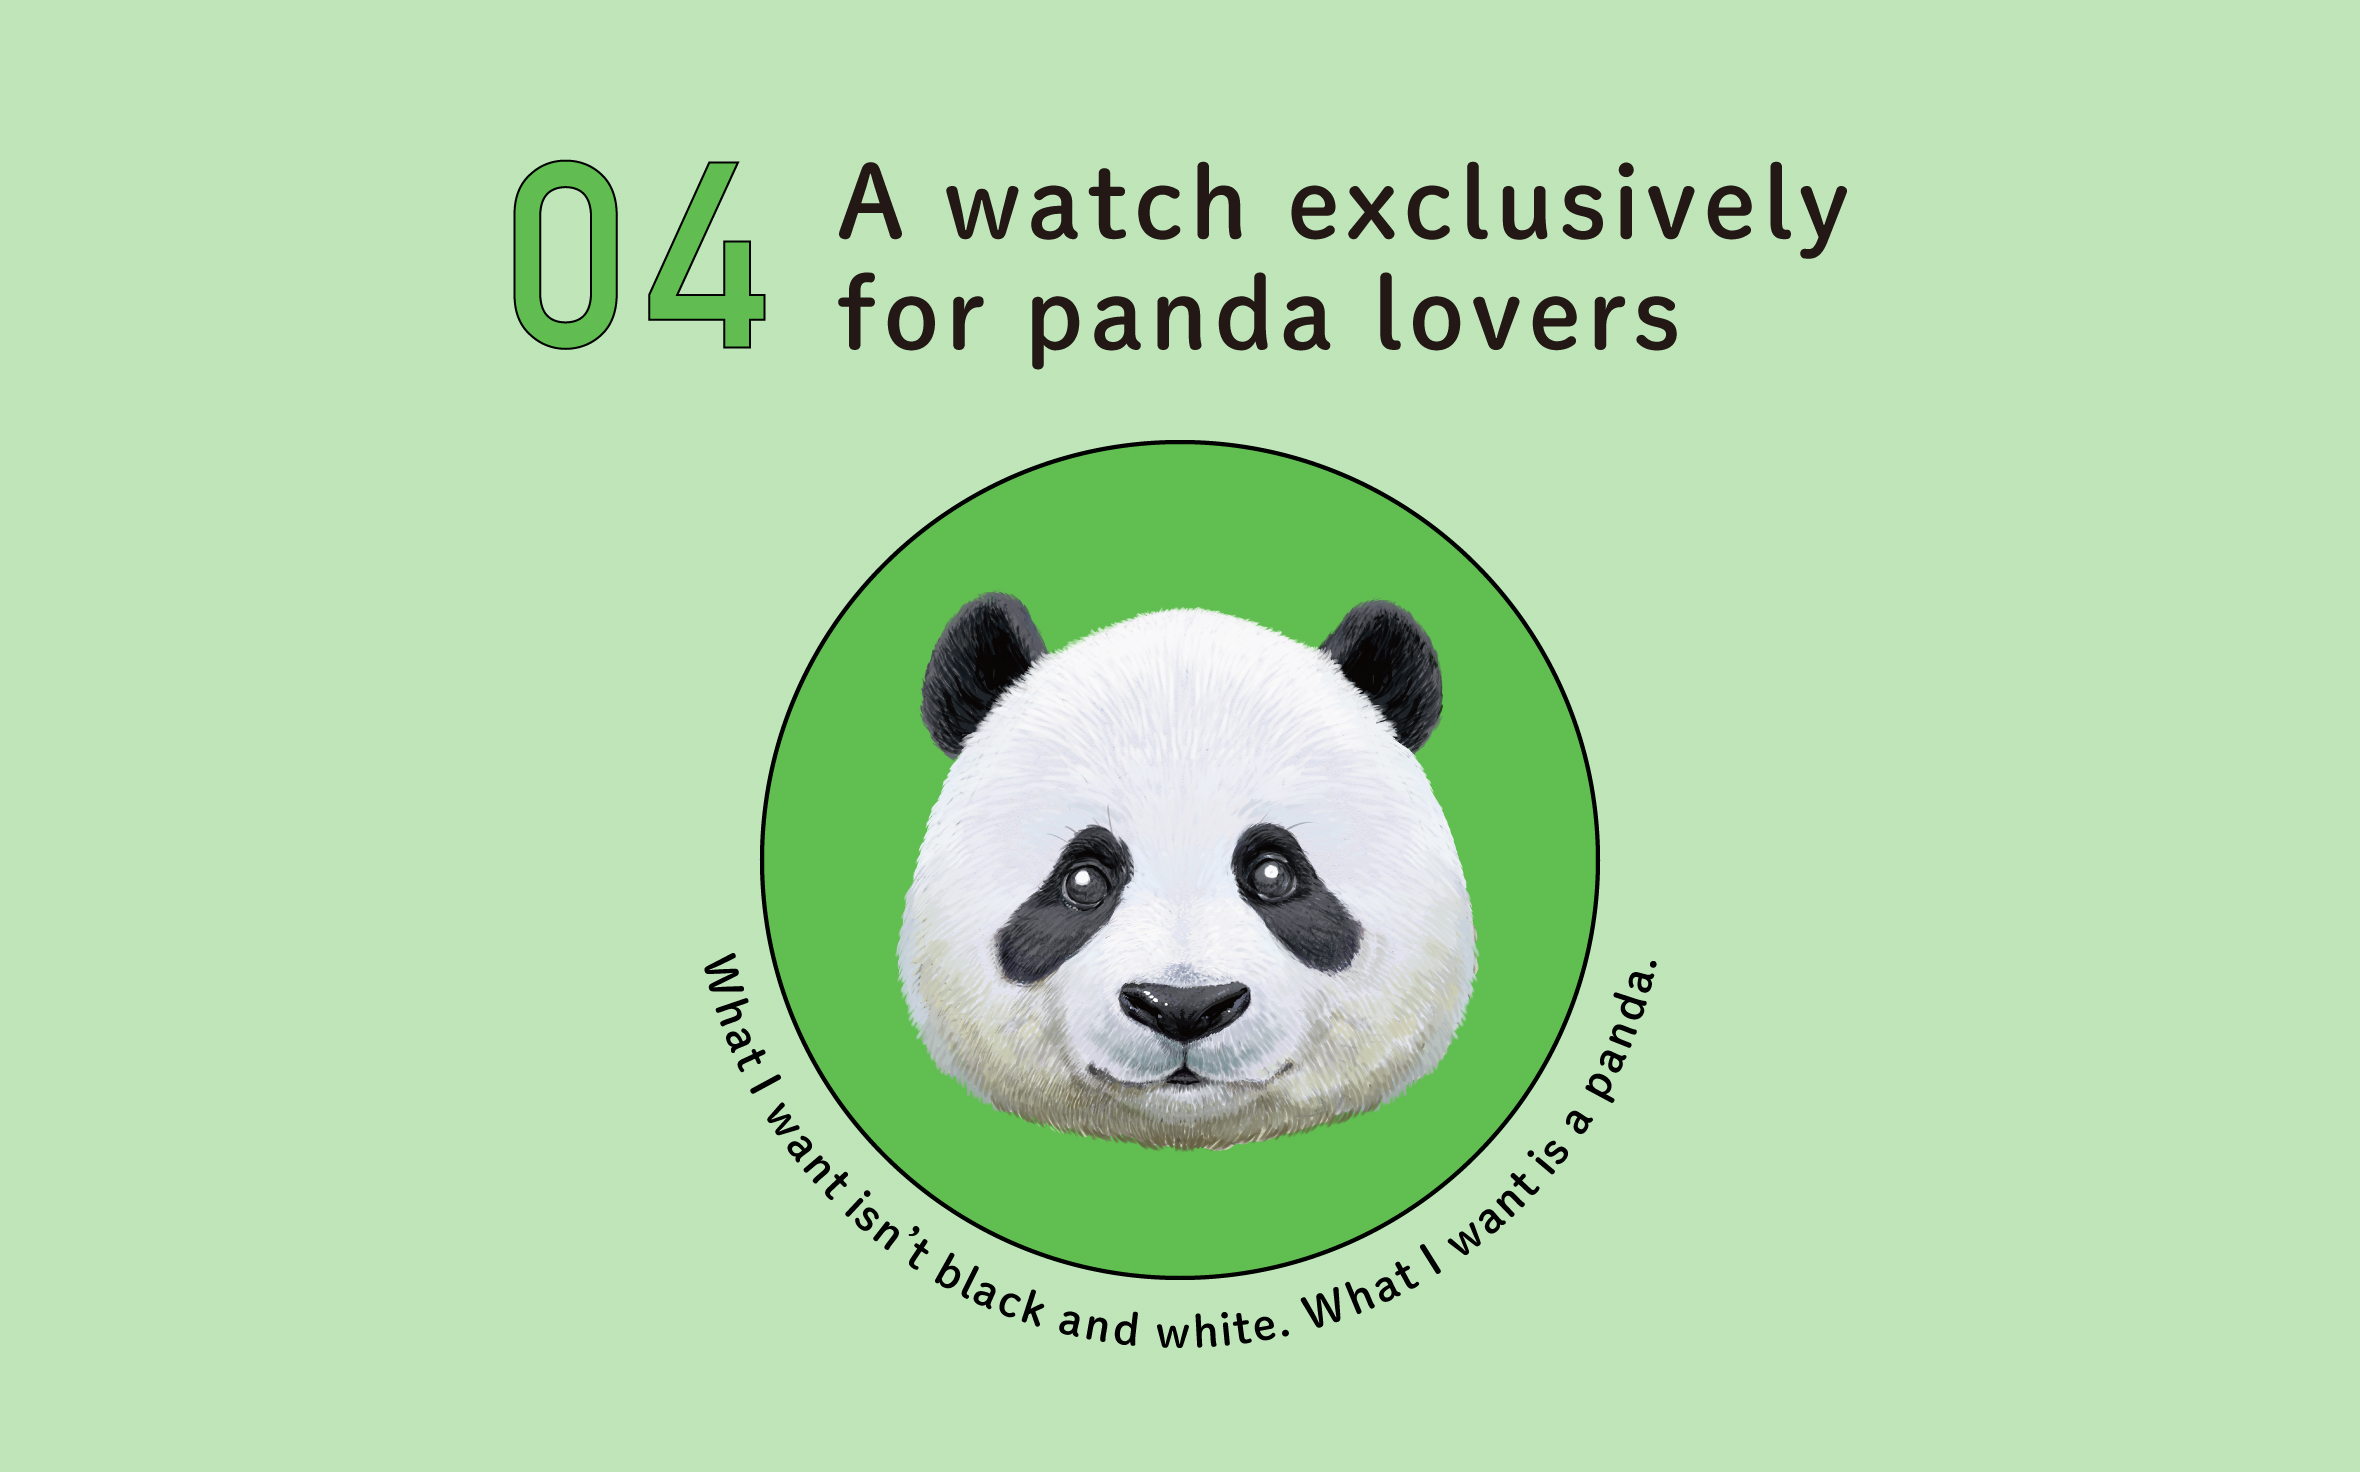 A watch exclusively for panda lovers